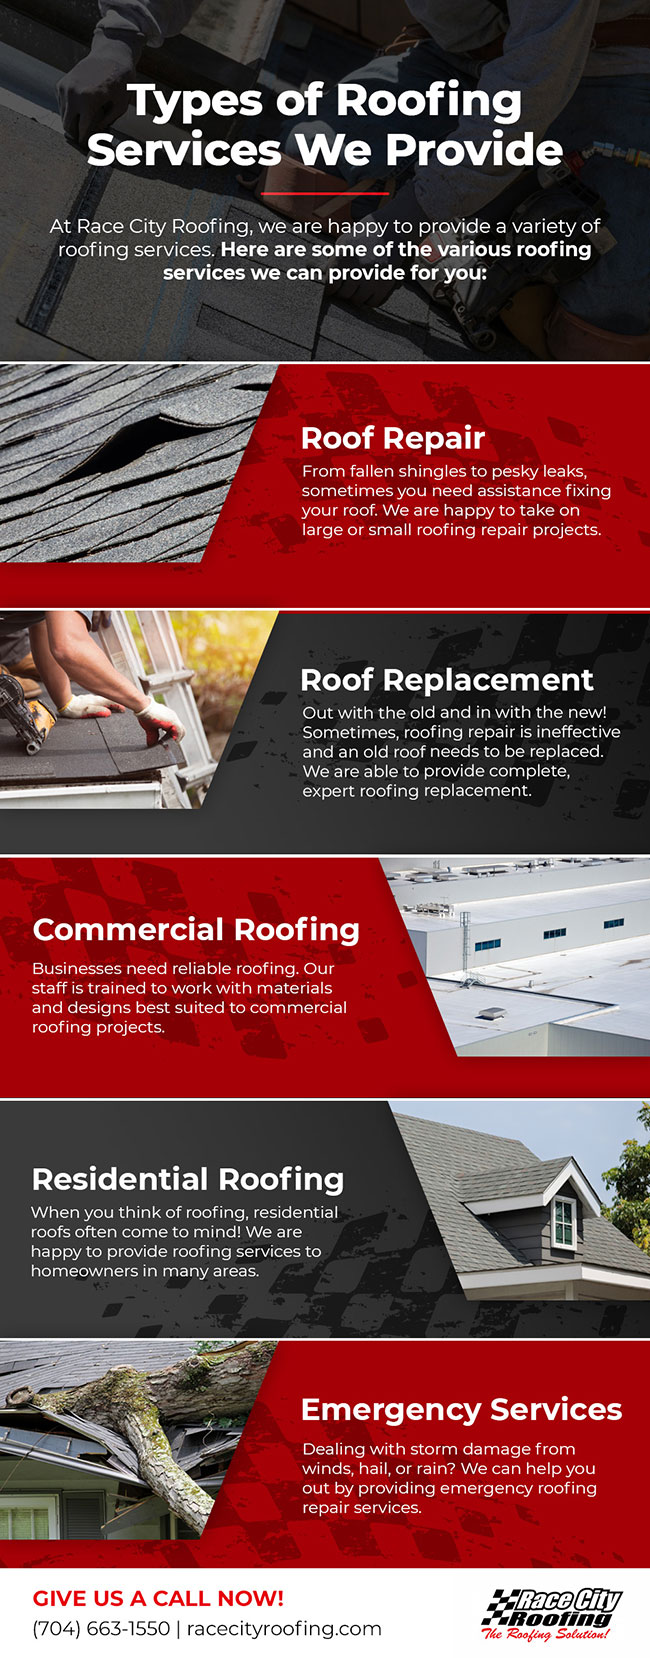 Types of Roofing Services We Provide 